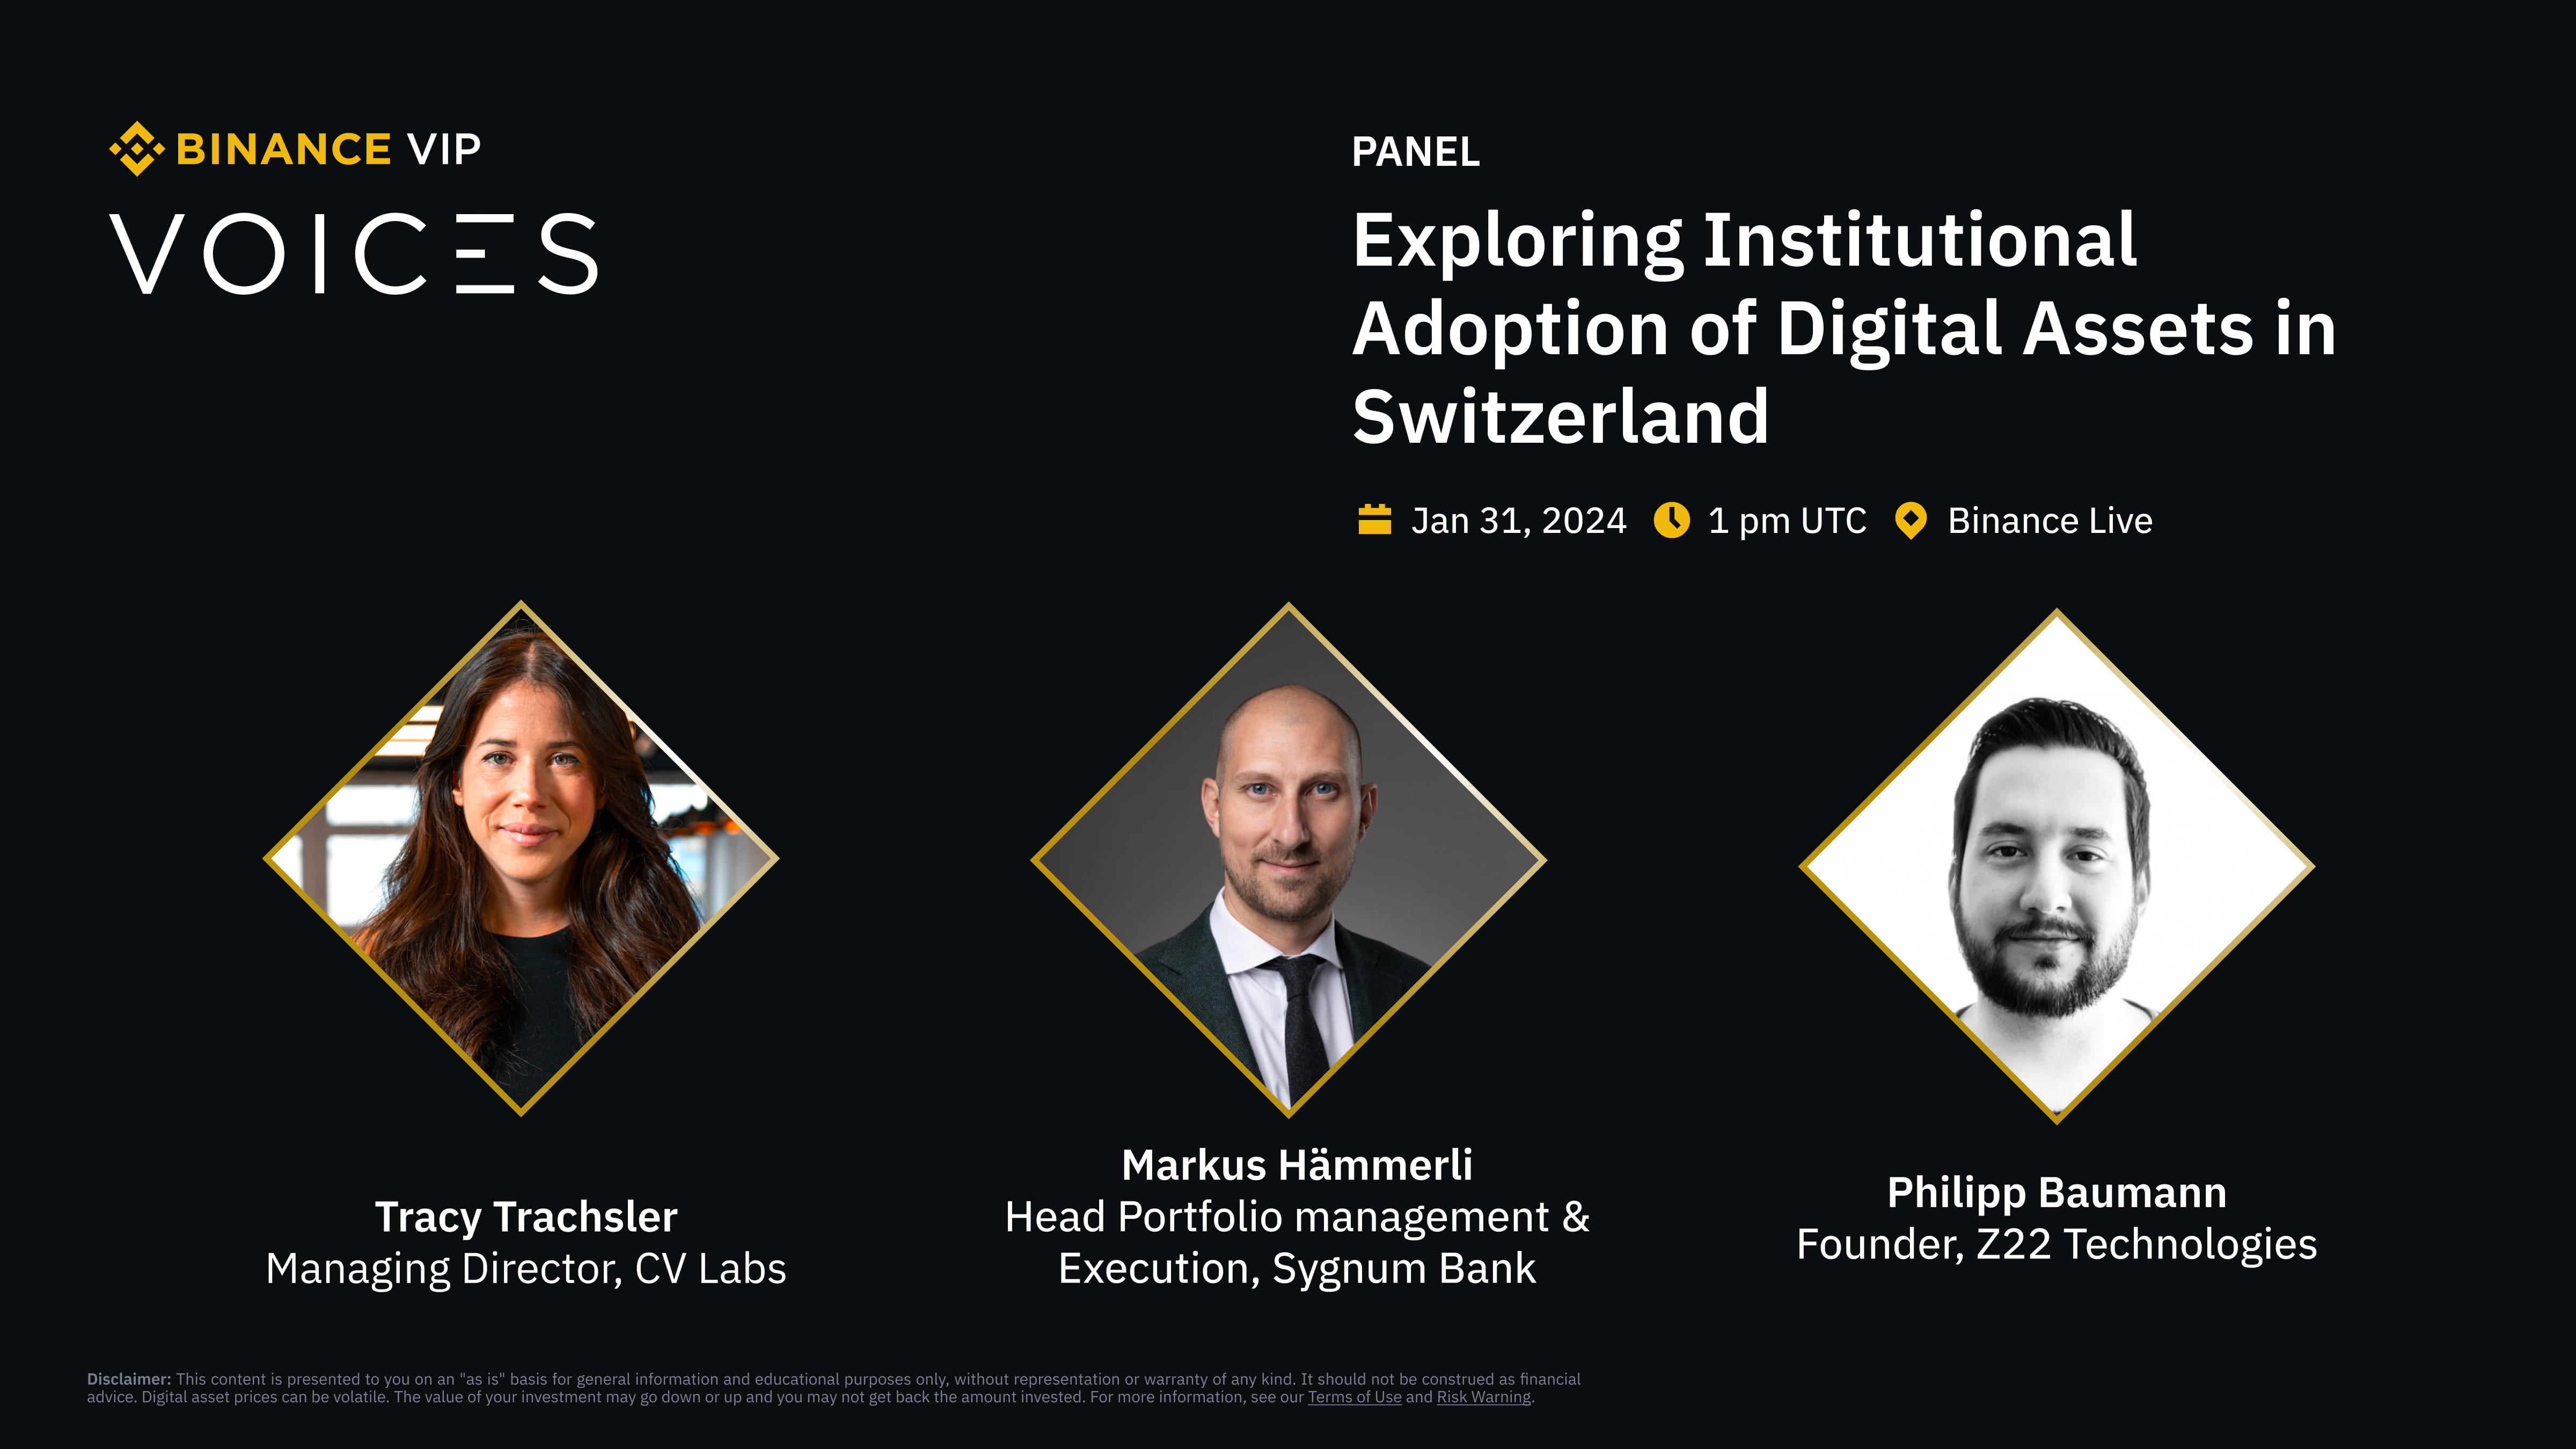 Binance VIP Voices Ep. 6 | Unpacking the Institutional Adoption of Digital Assets in Switzerland